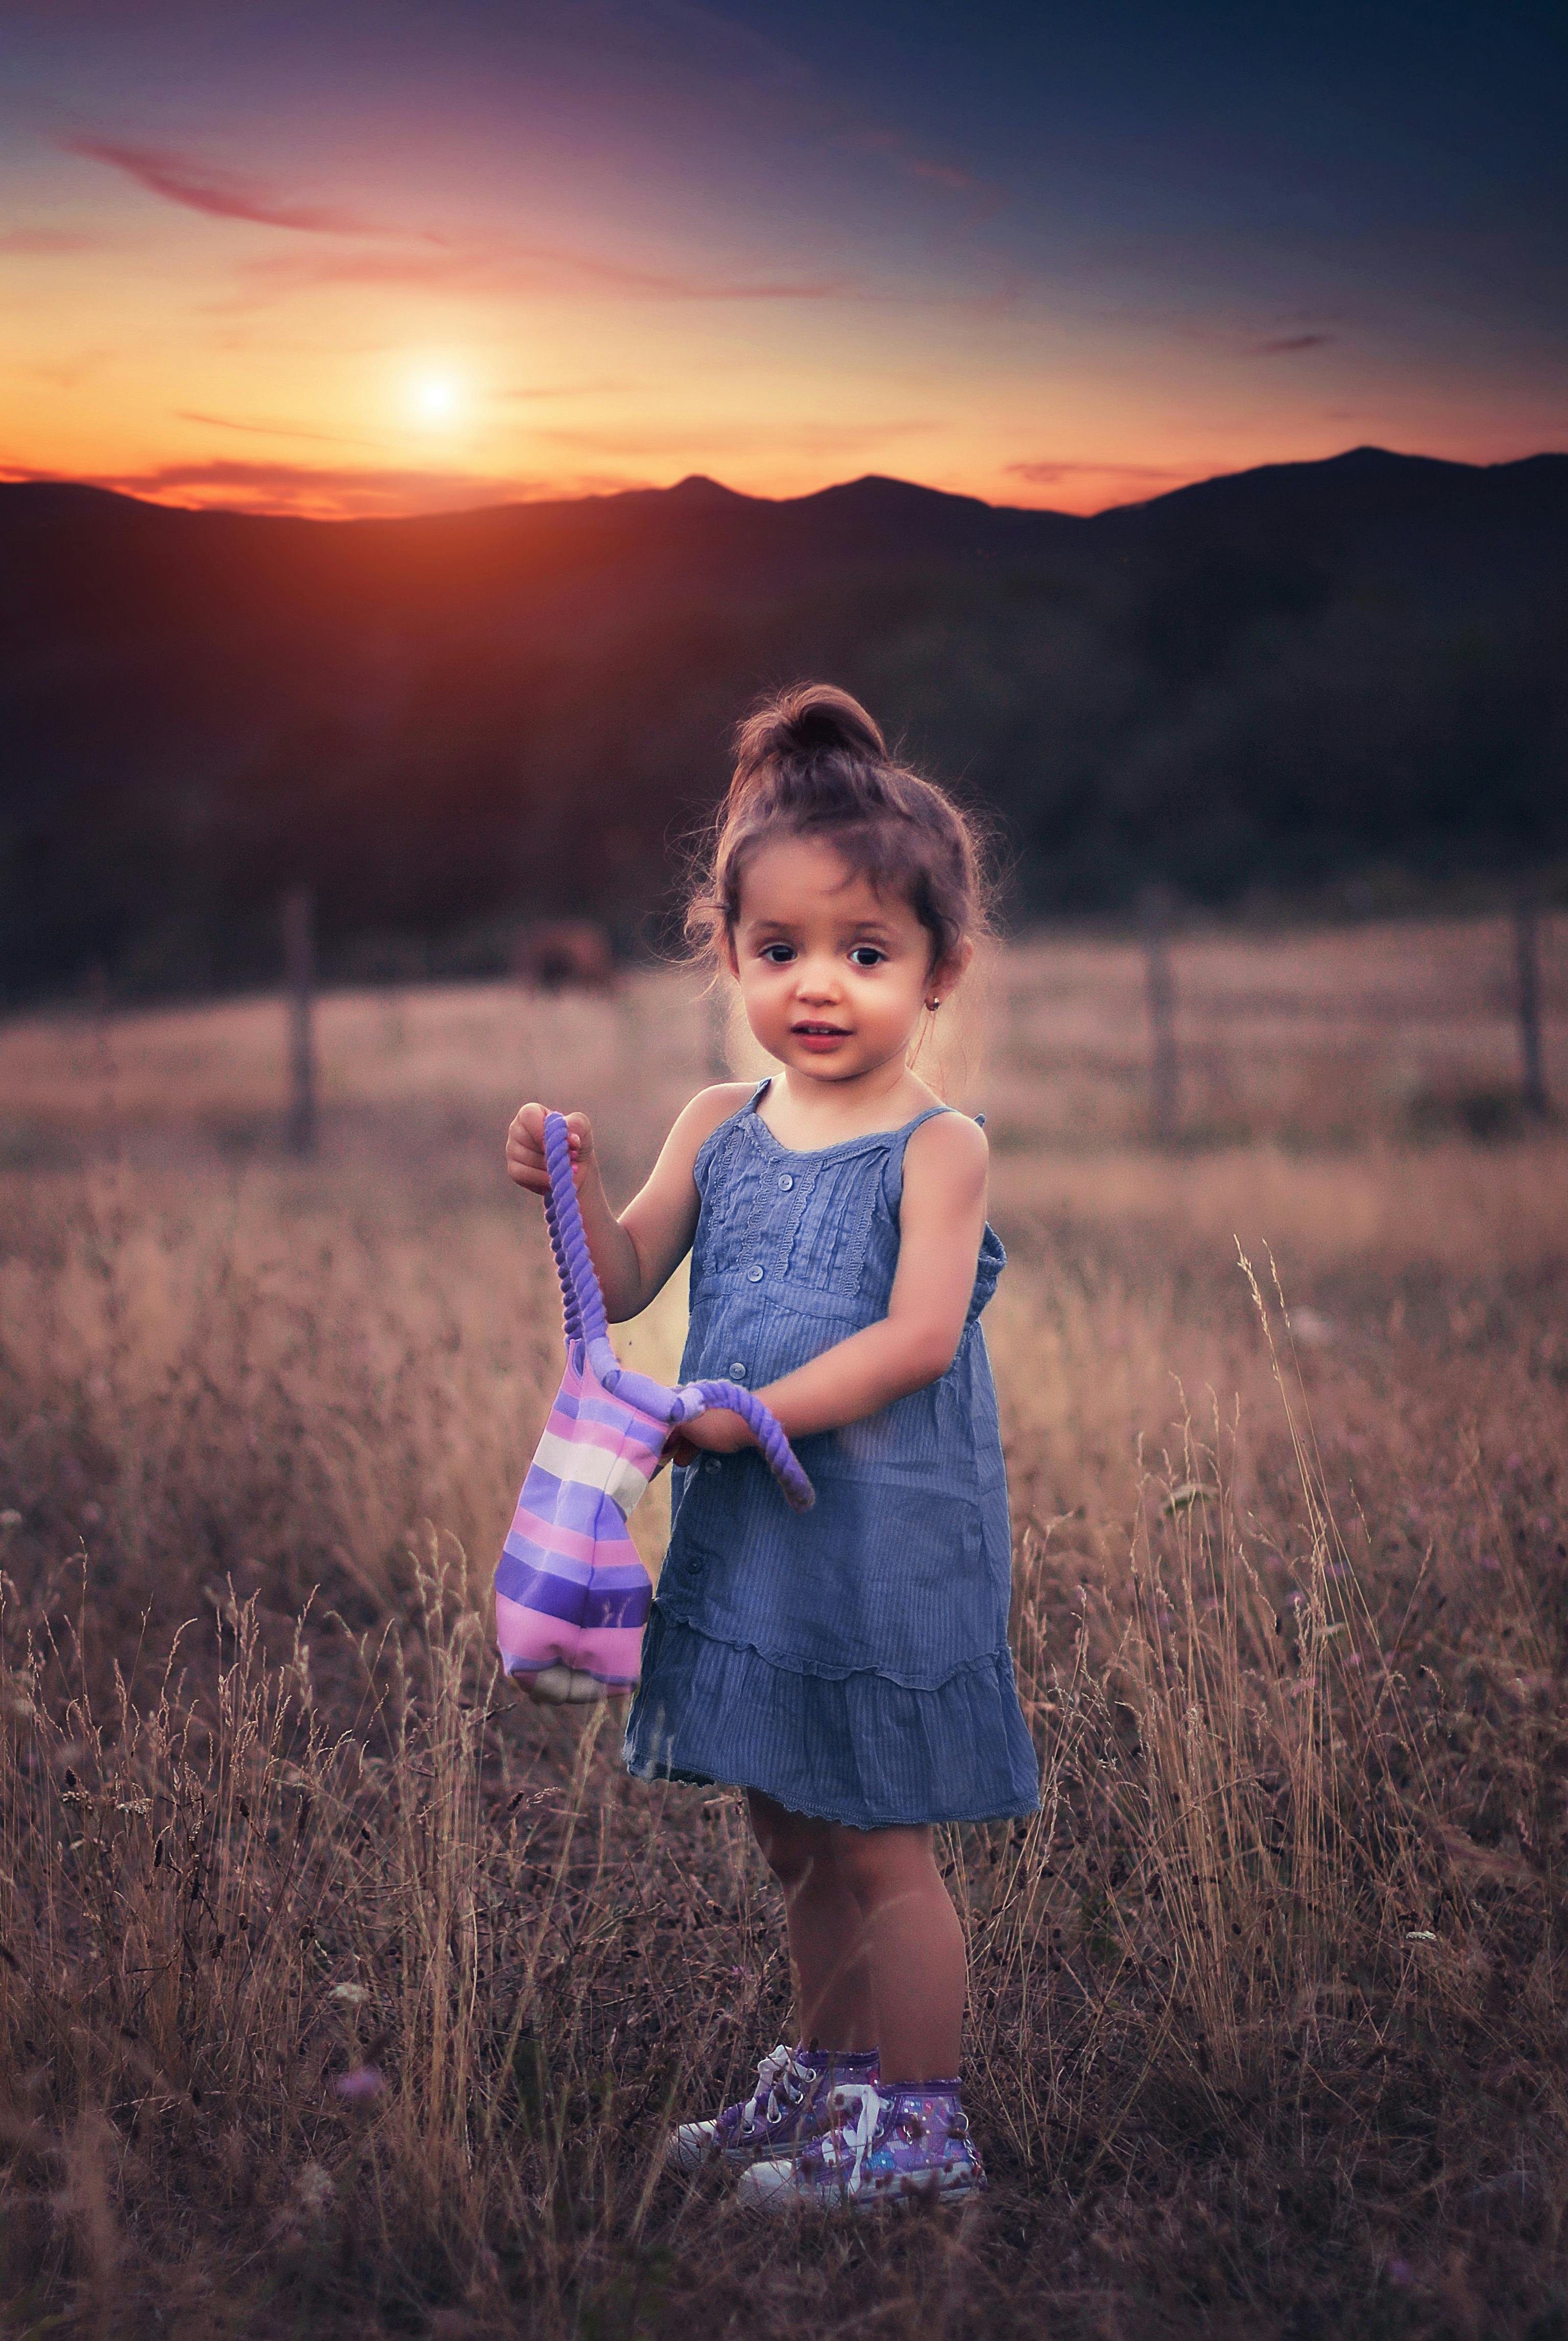 90000 Best Cute Baby Pic  100 Free Download  Pexels Stock Photos